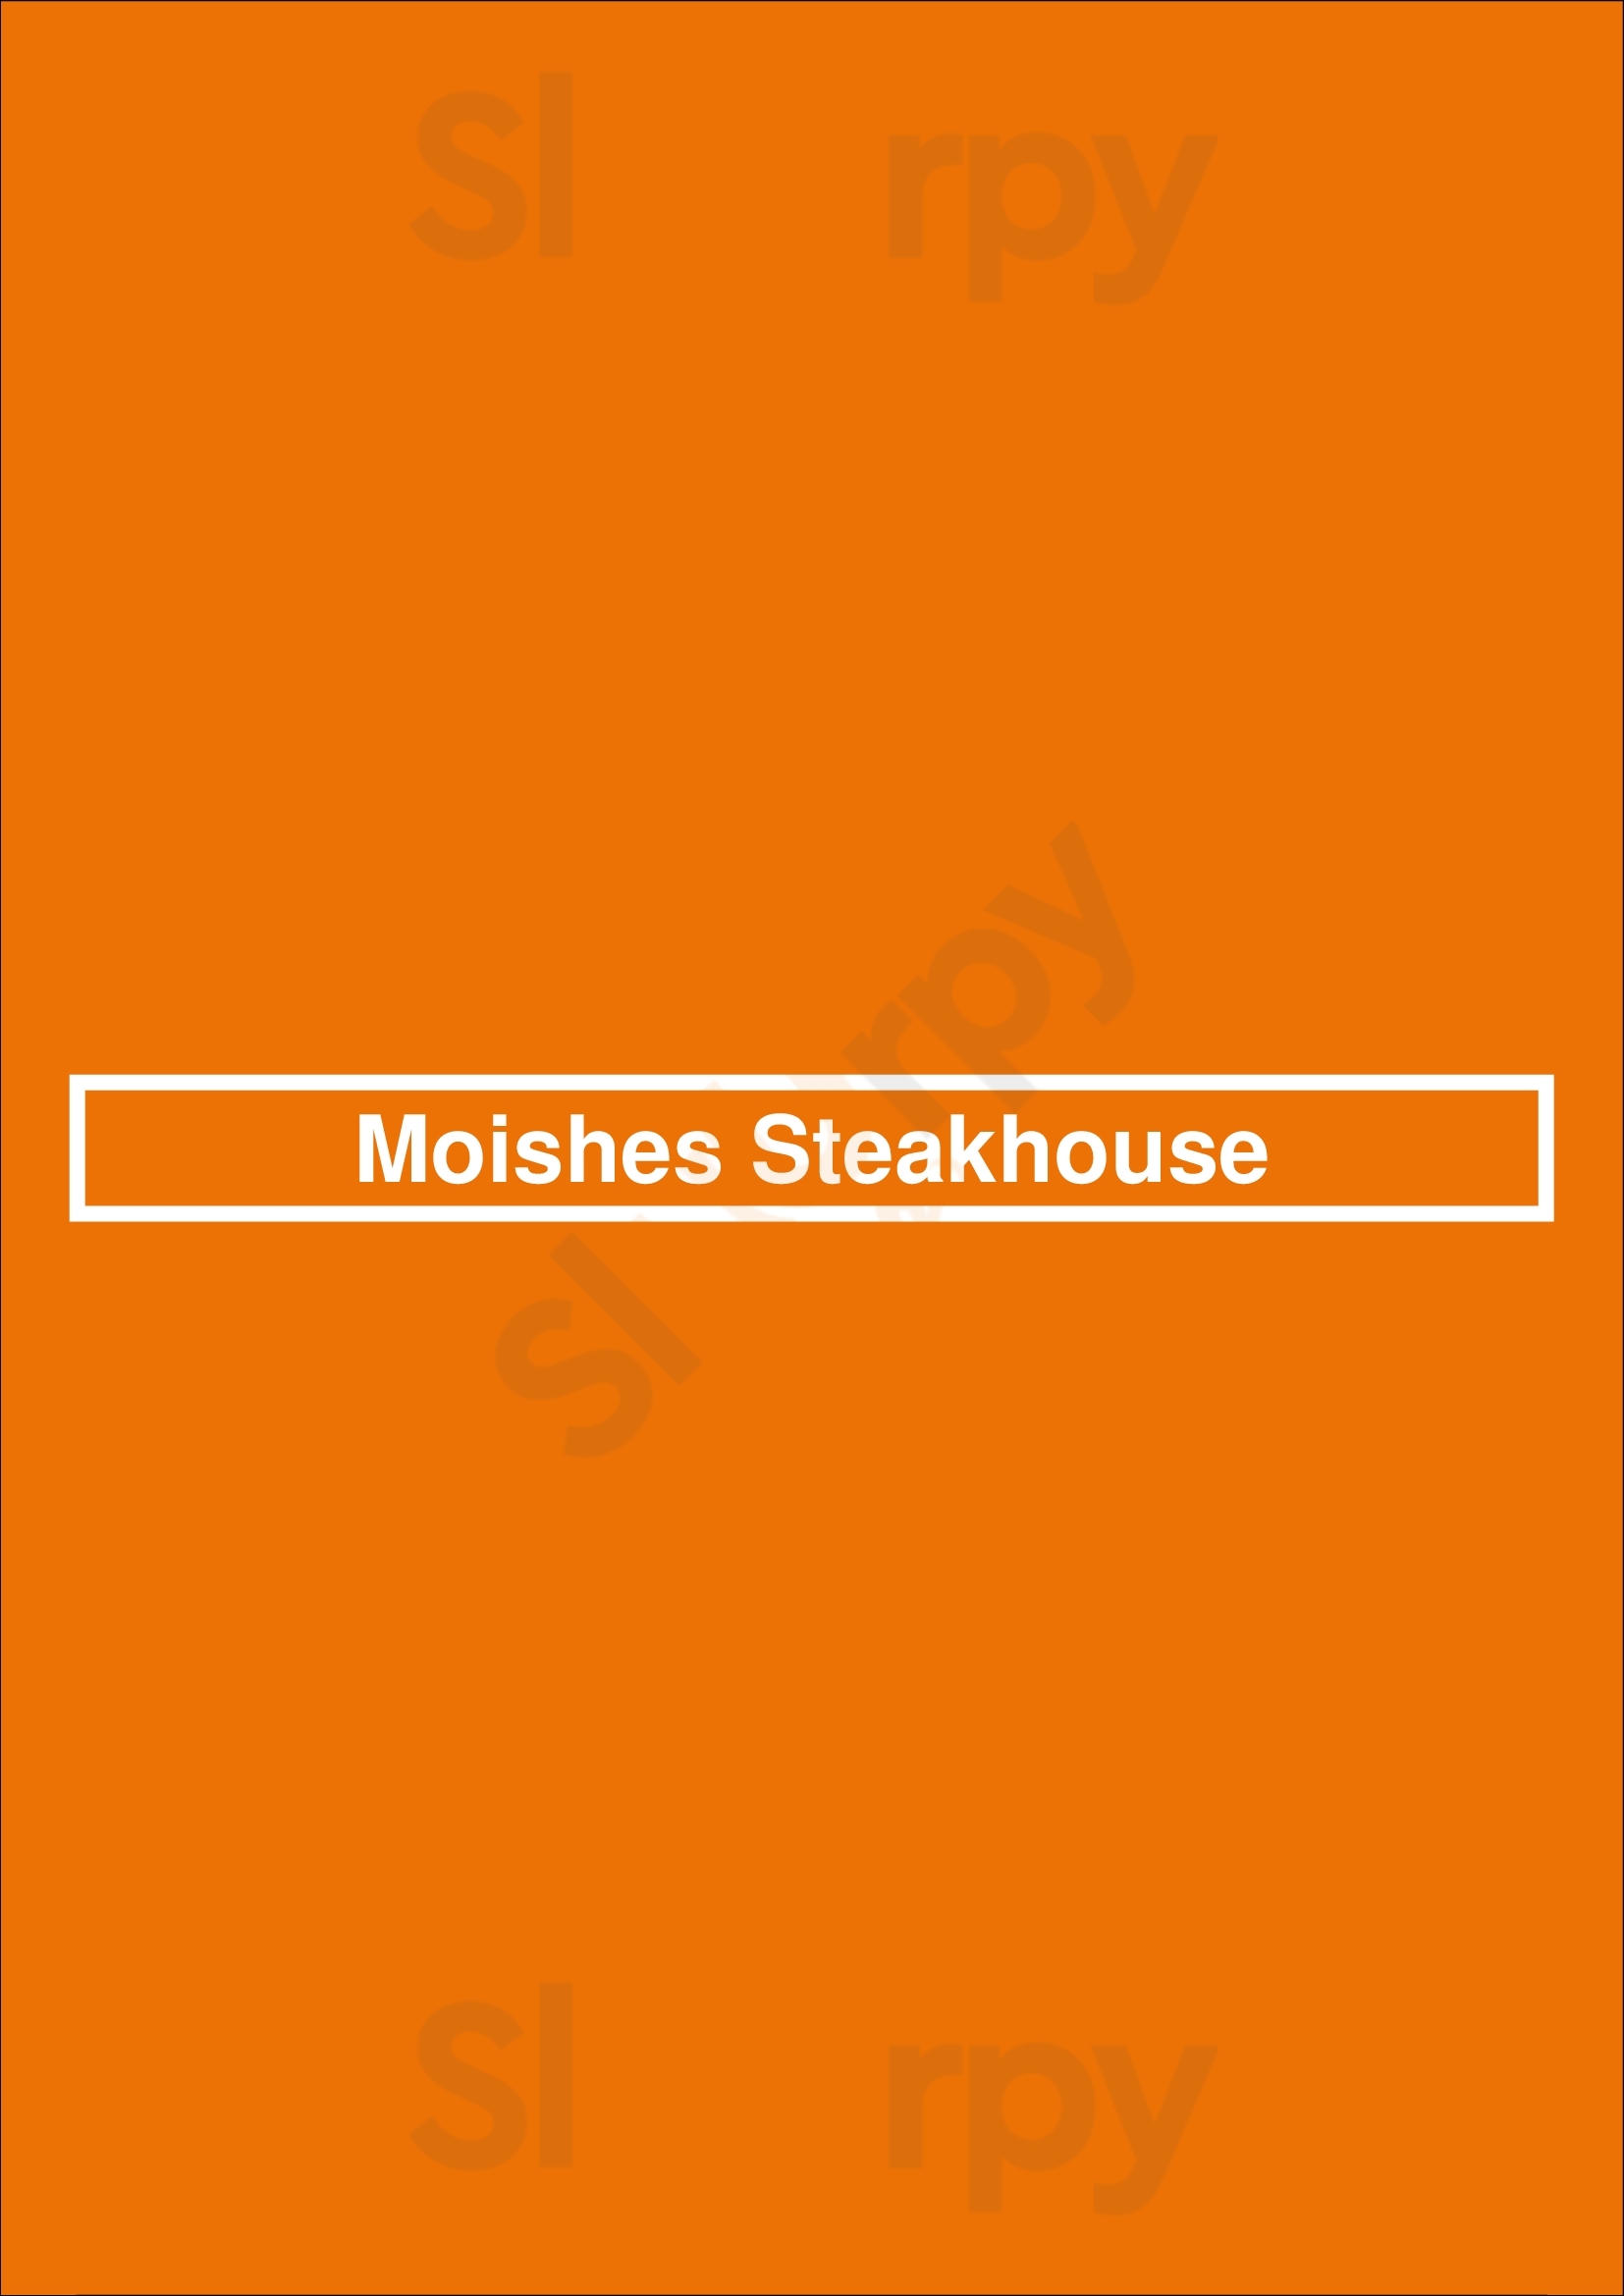 Moishes Steakhouse Montreal Menu - 1